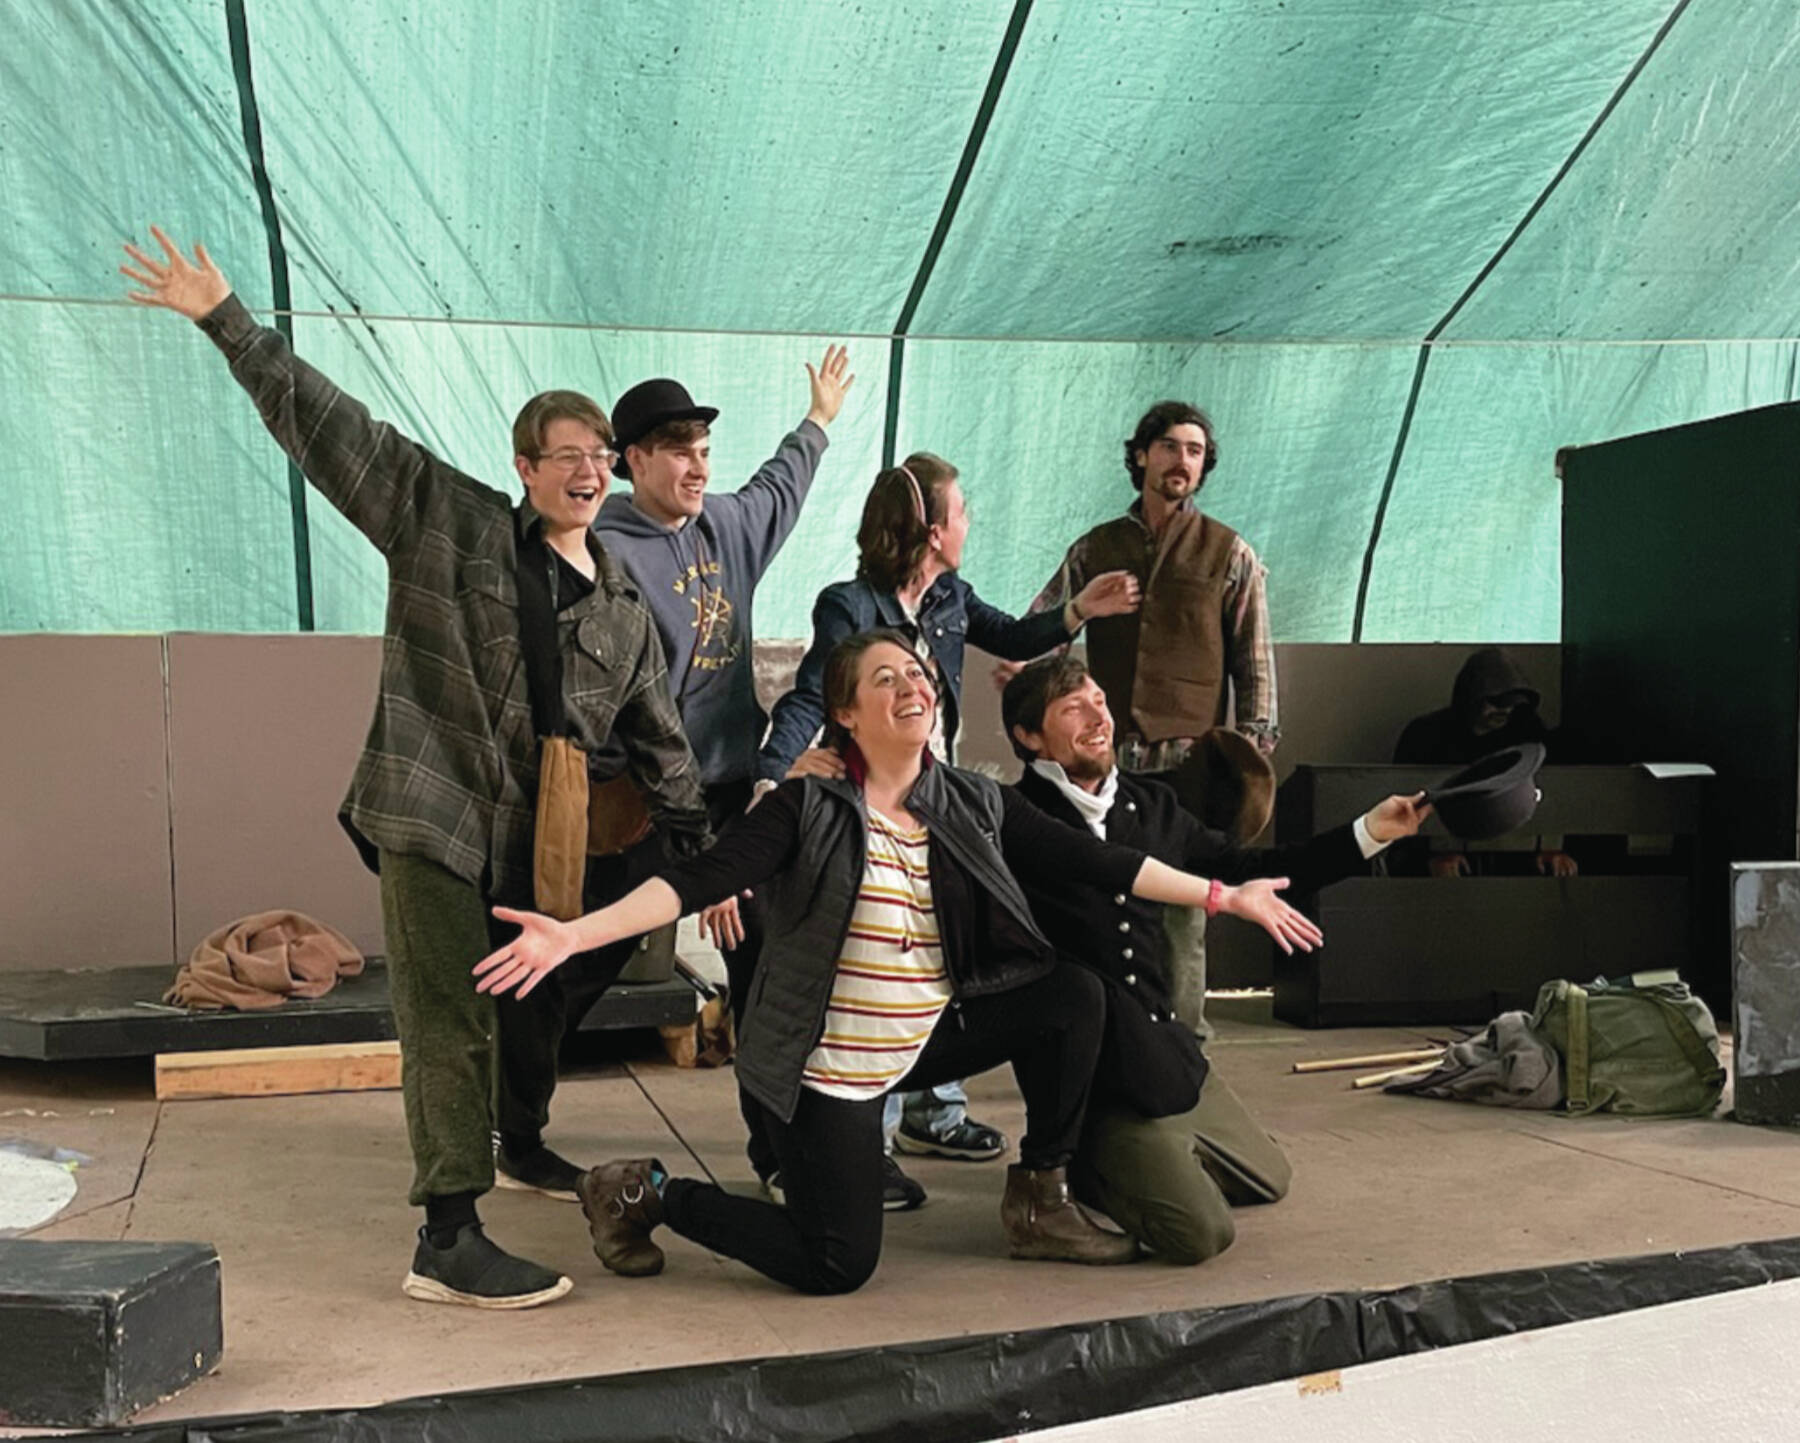 Emilie Springer/ Homer News
Dayus Geysbeek, Adgel Chandler, Reece Cowan and Ethan Martin in the backrow and Maura Brenin and Rudy Multz in the front rehearse a dance from Cannibal! on Wednesday July 12.